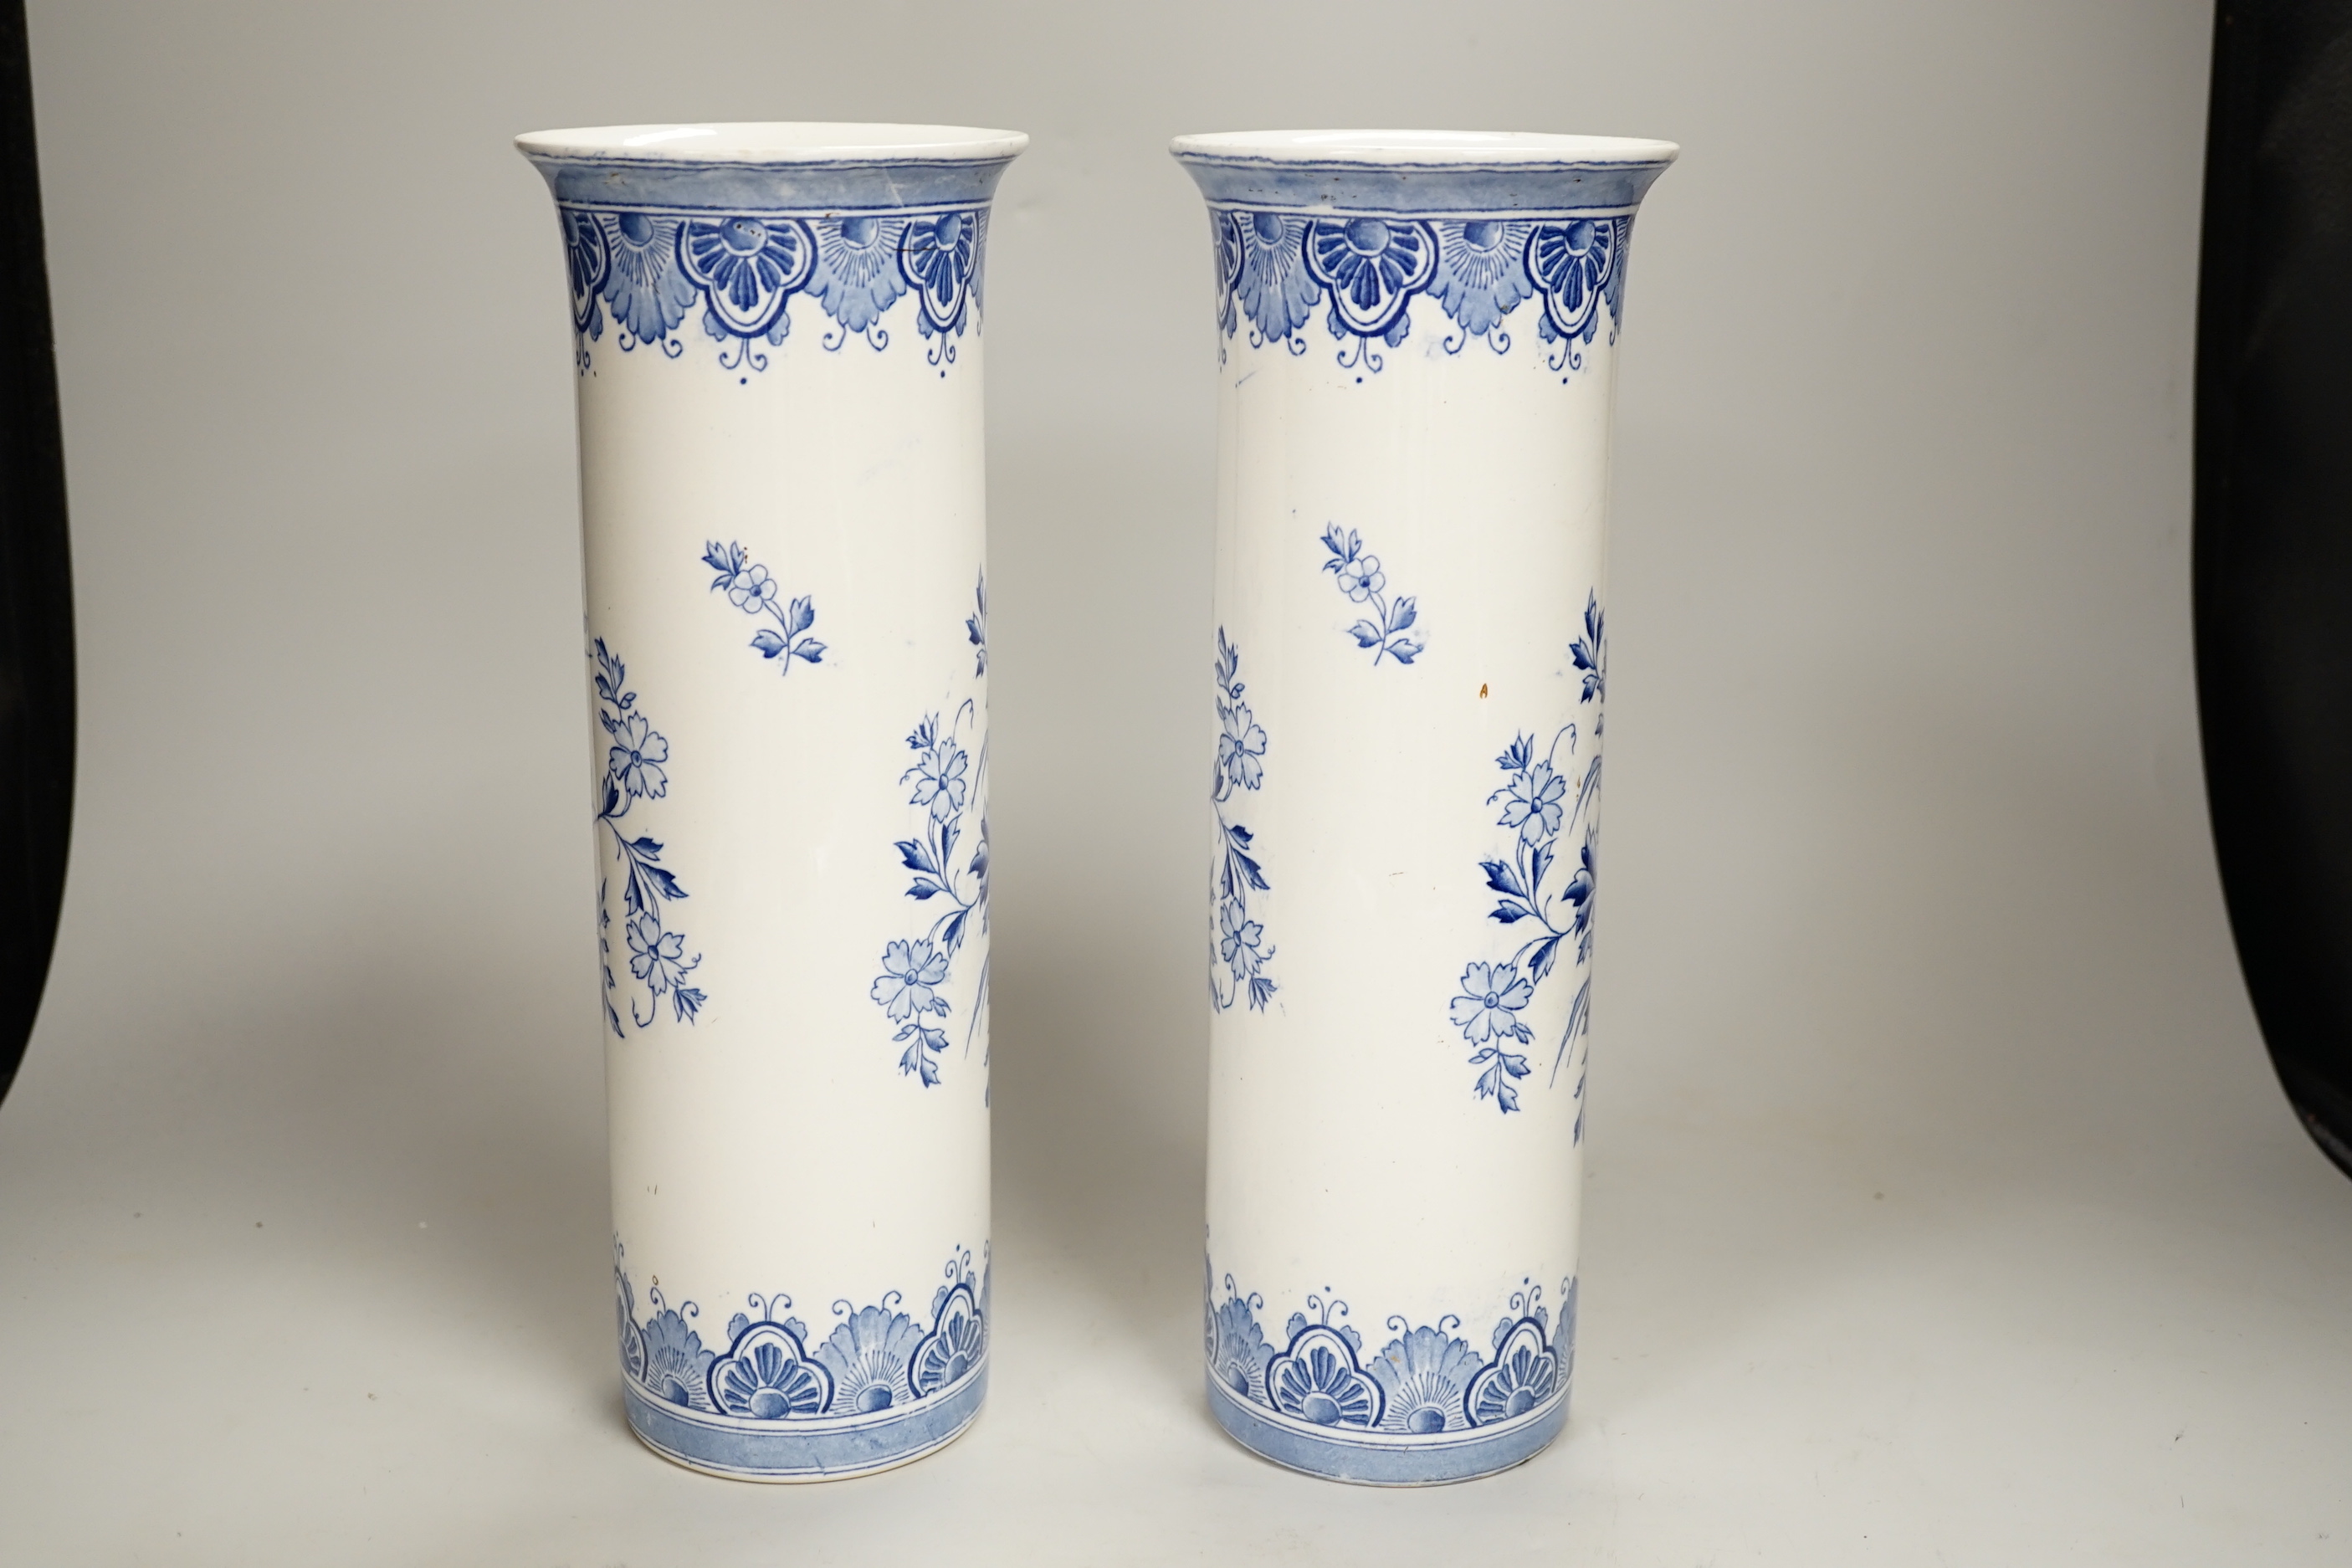 A pair of Delft blue and white cylindrical vases, each decorated with boats, 30cm high